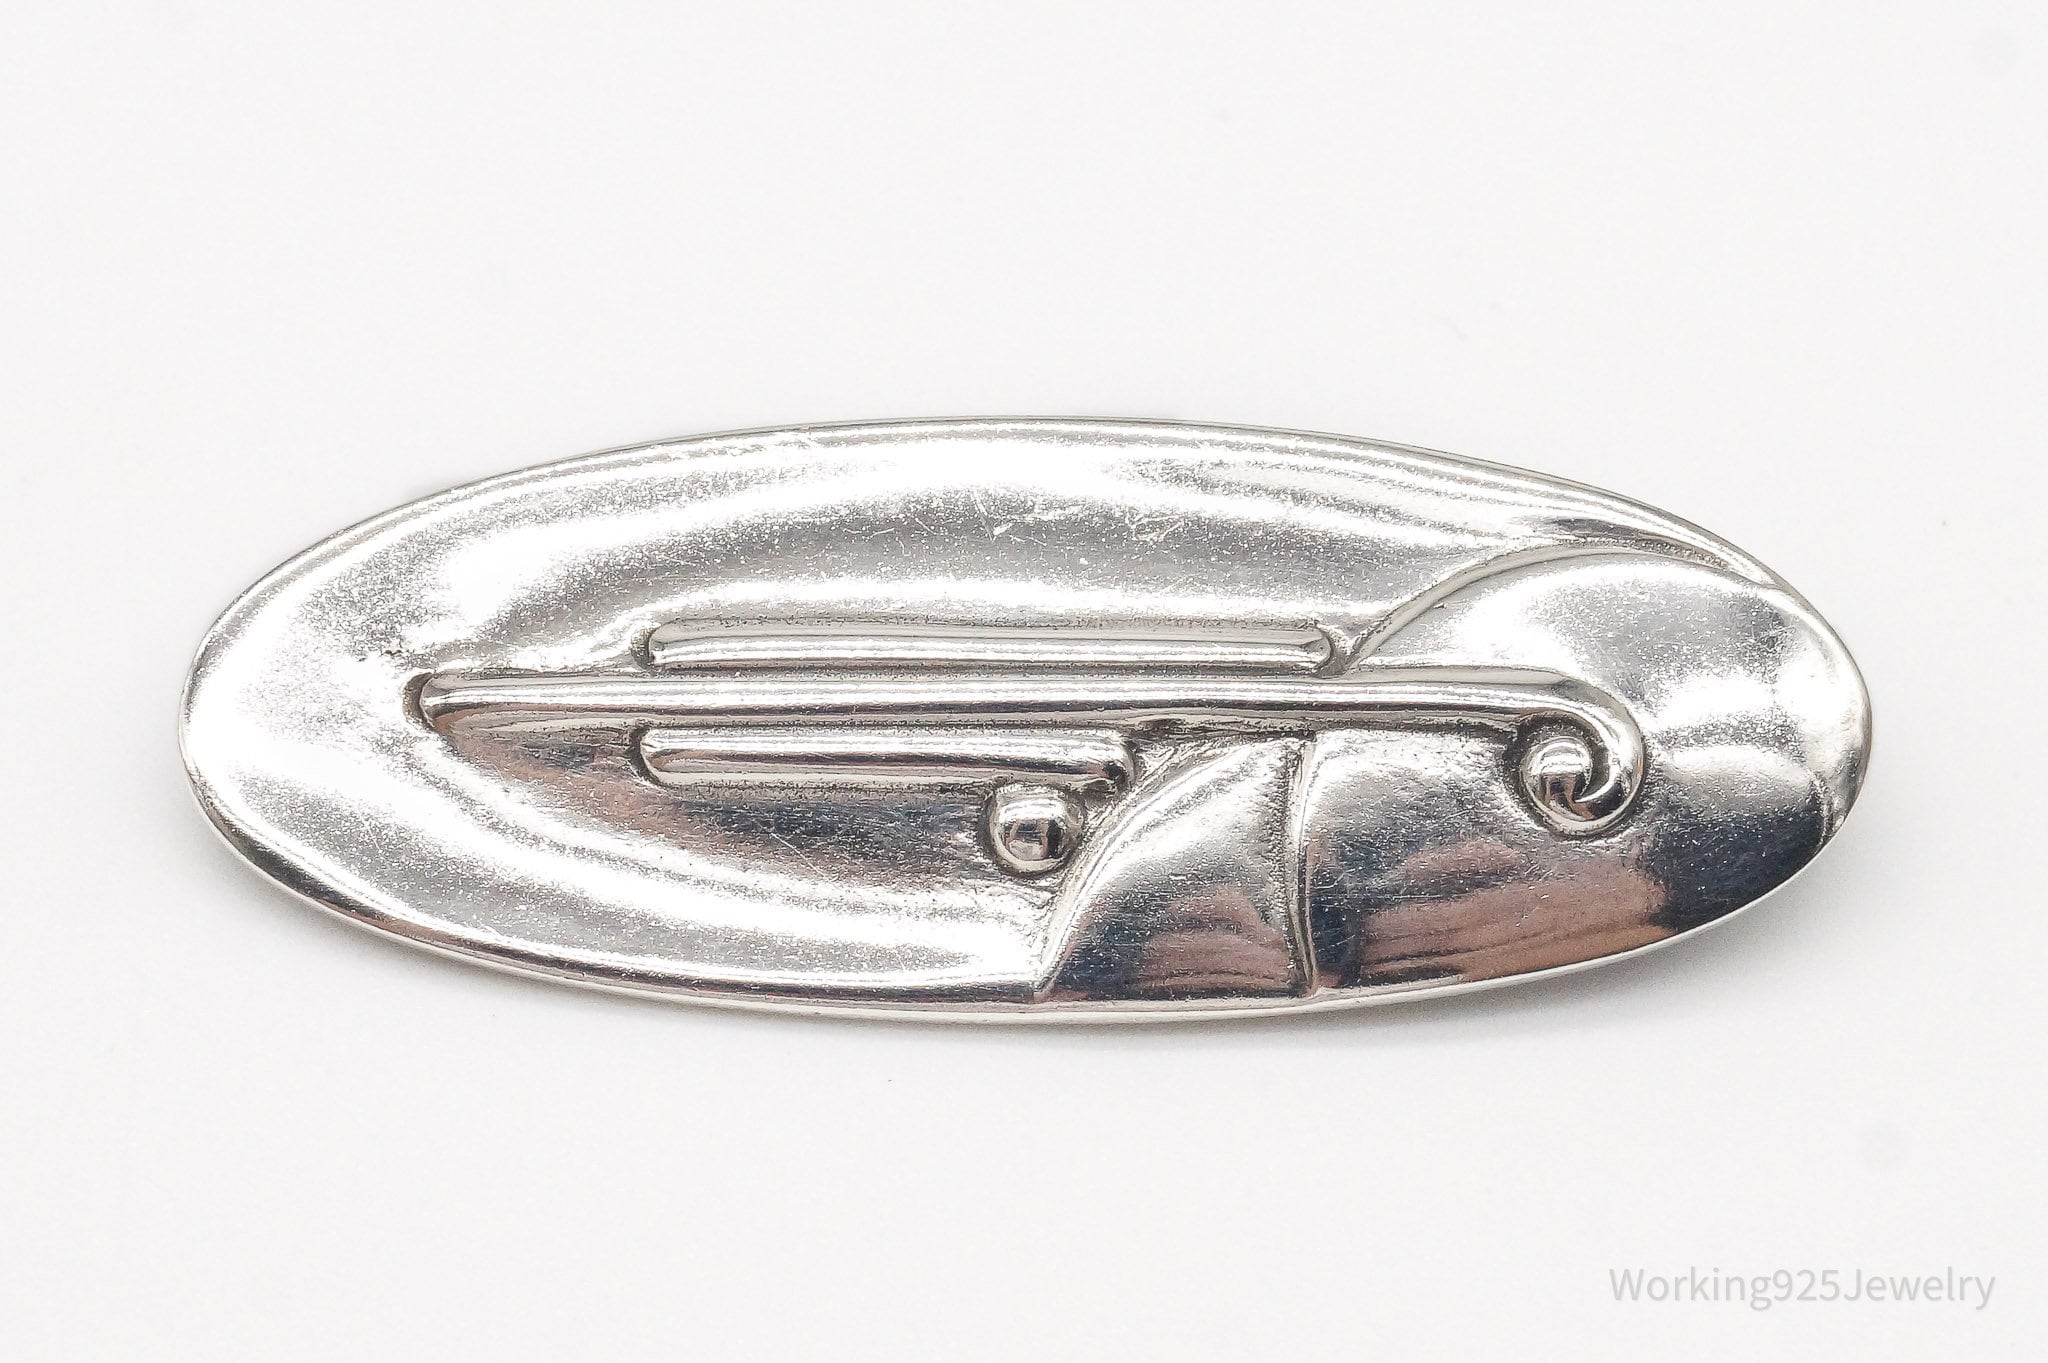 Vintage Art Deco / Mid Century Style Sterling Silver Brooch Pin